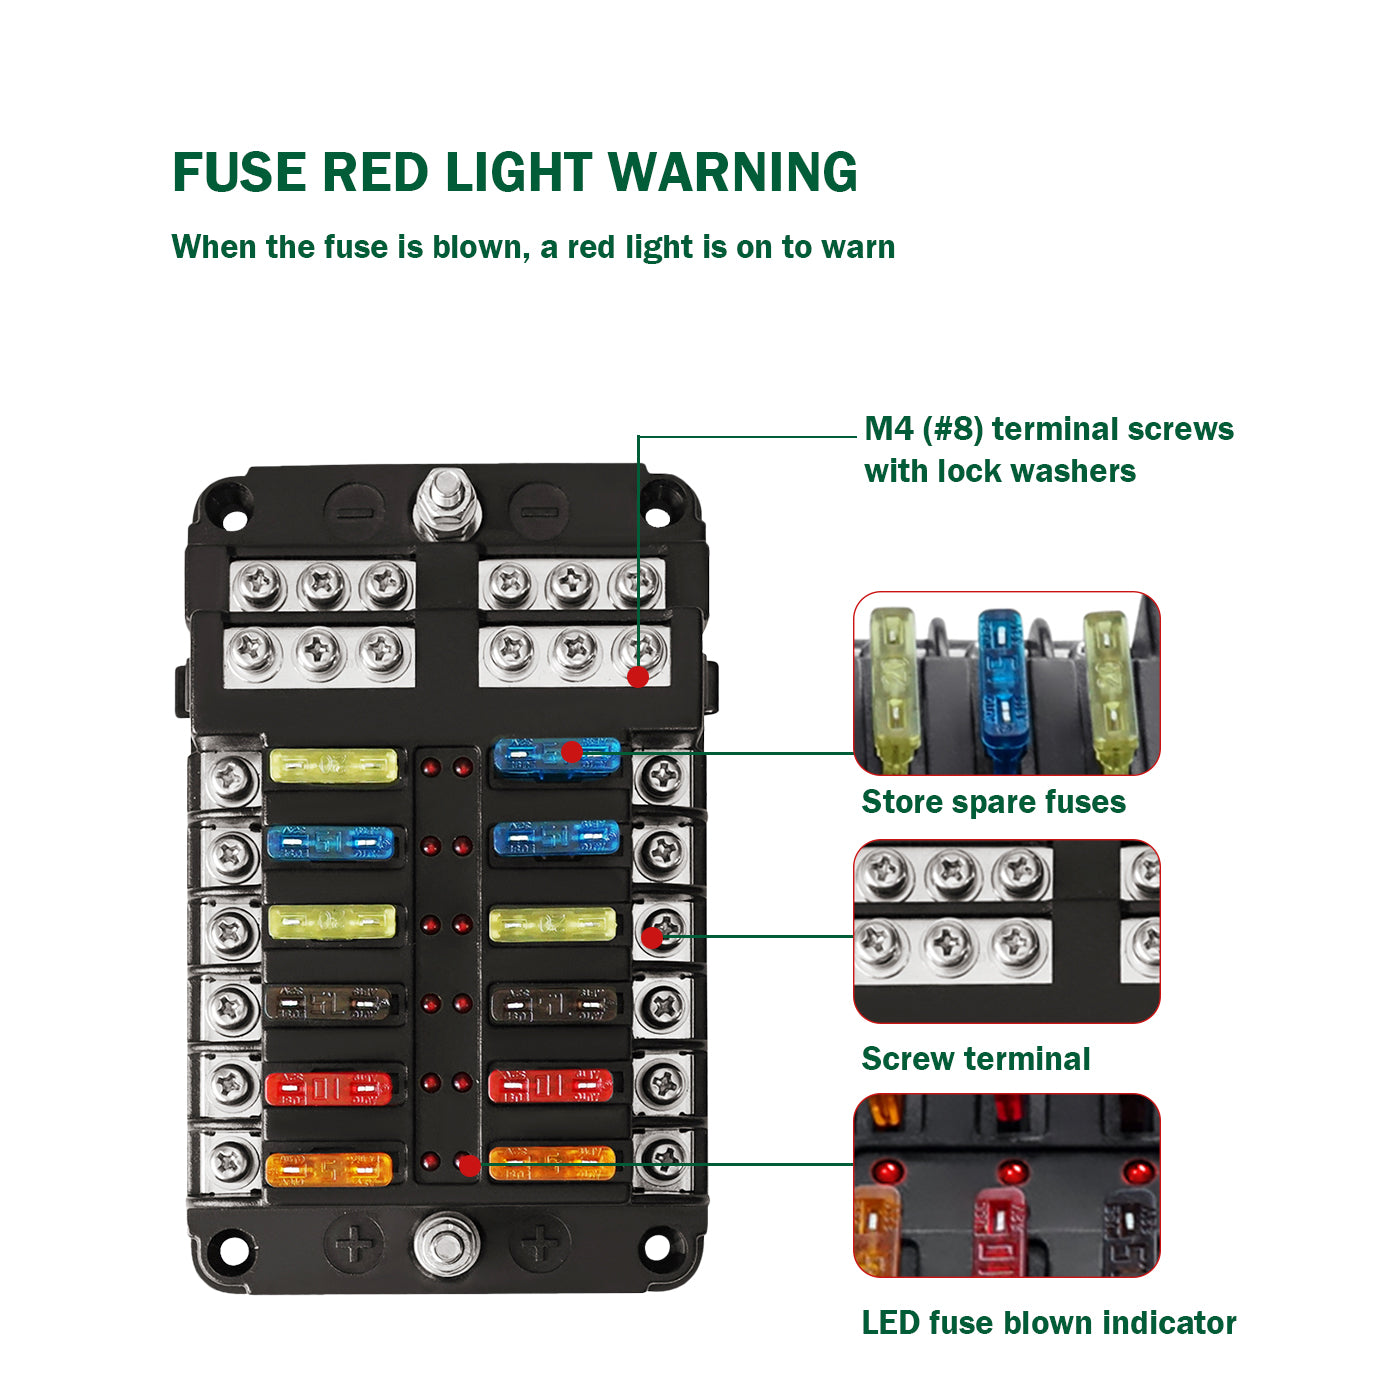 GenuineMarine 12-Way ATC/ATO/ATS Blade Fuse Box Holder with Negative Ground Connections, LED Warning Indicator, Standard Fuse, Bolt Connect Terminals, 30A Per Circuit, for RV Auto Truck Vehicle - THALASSA